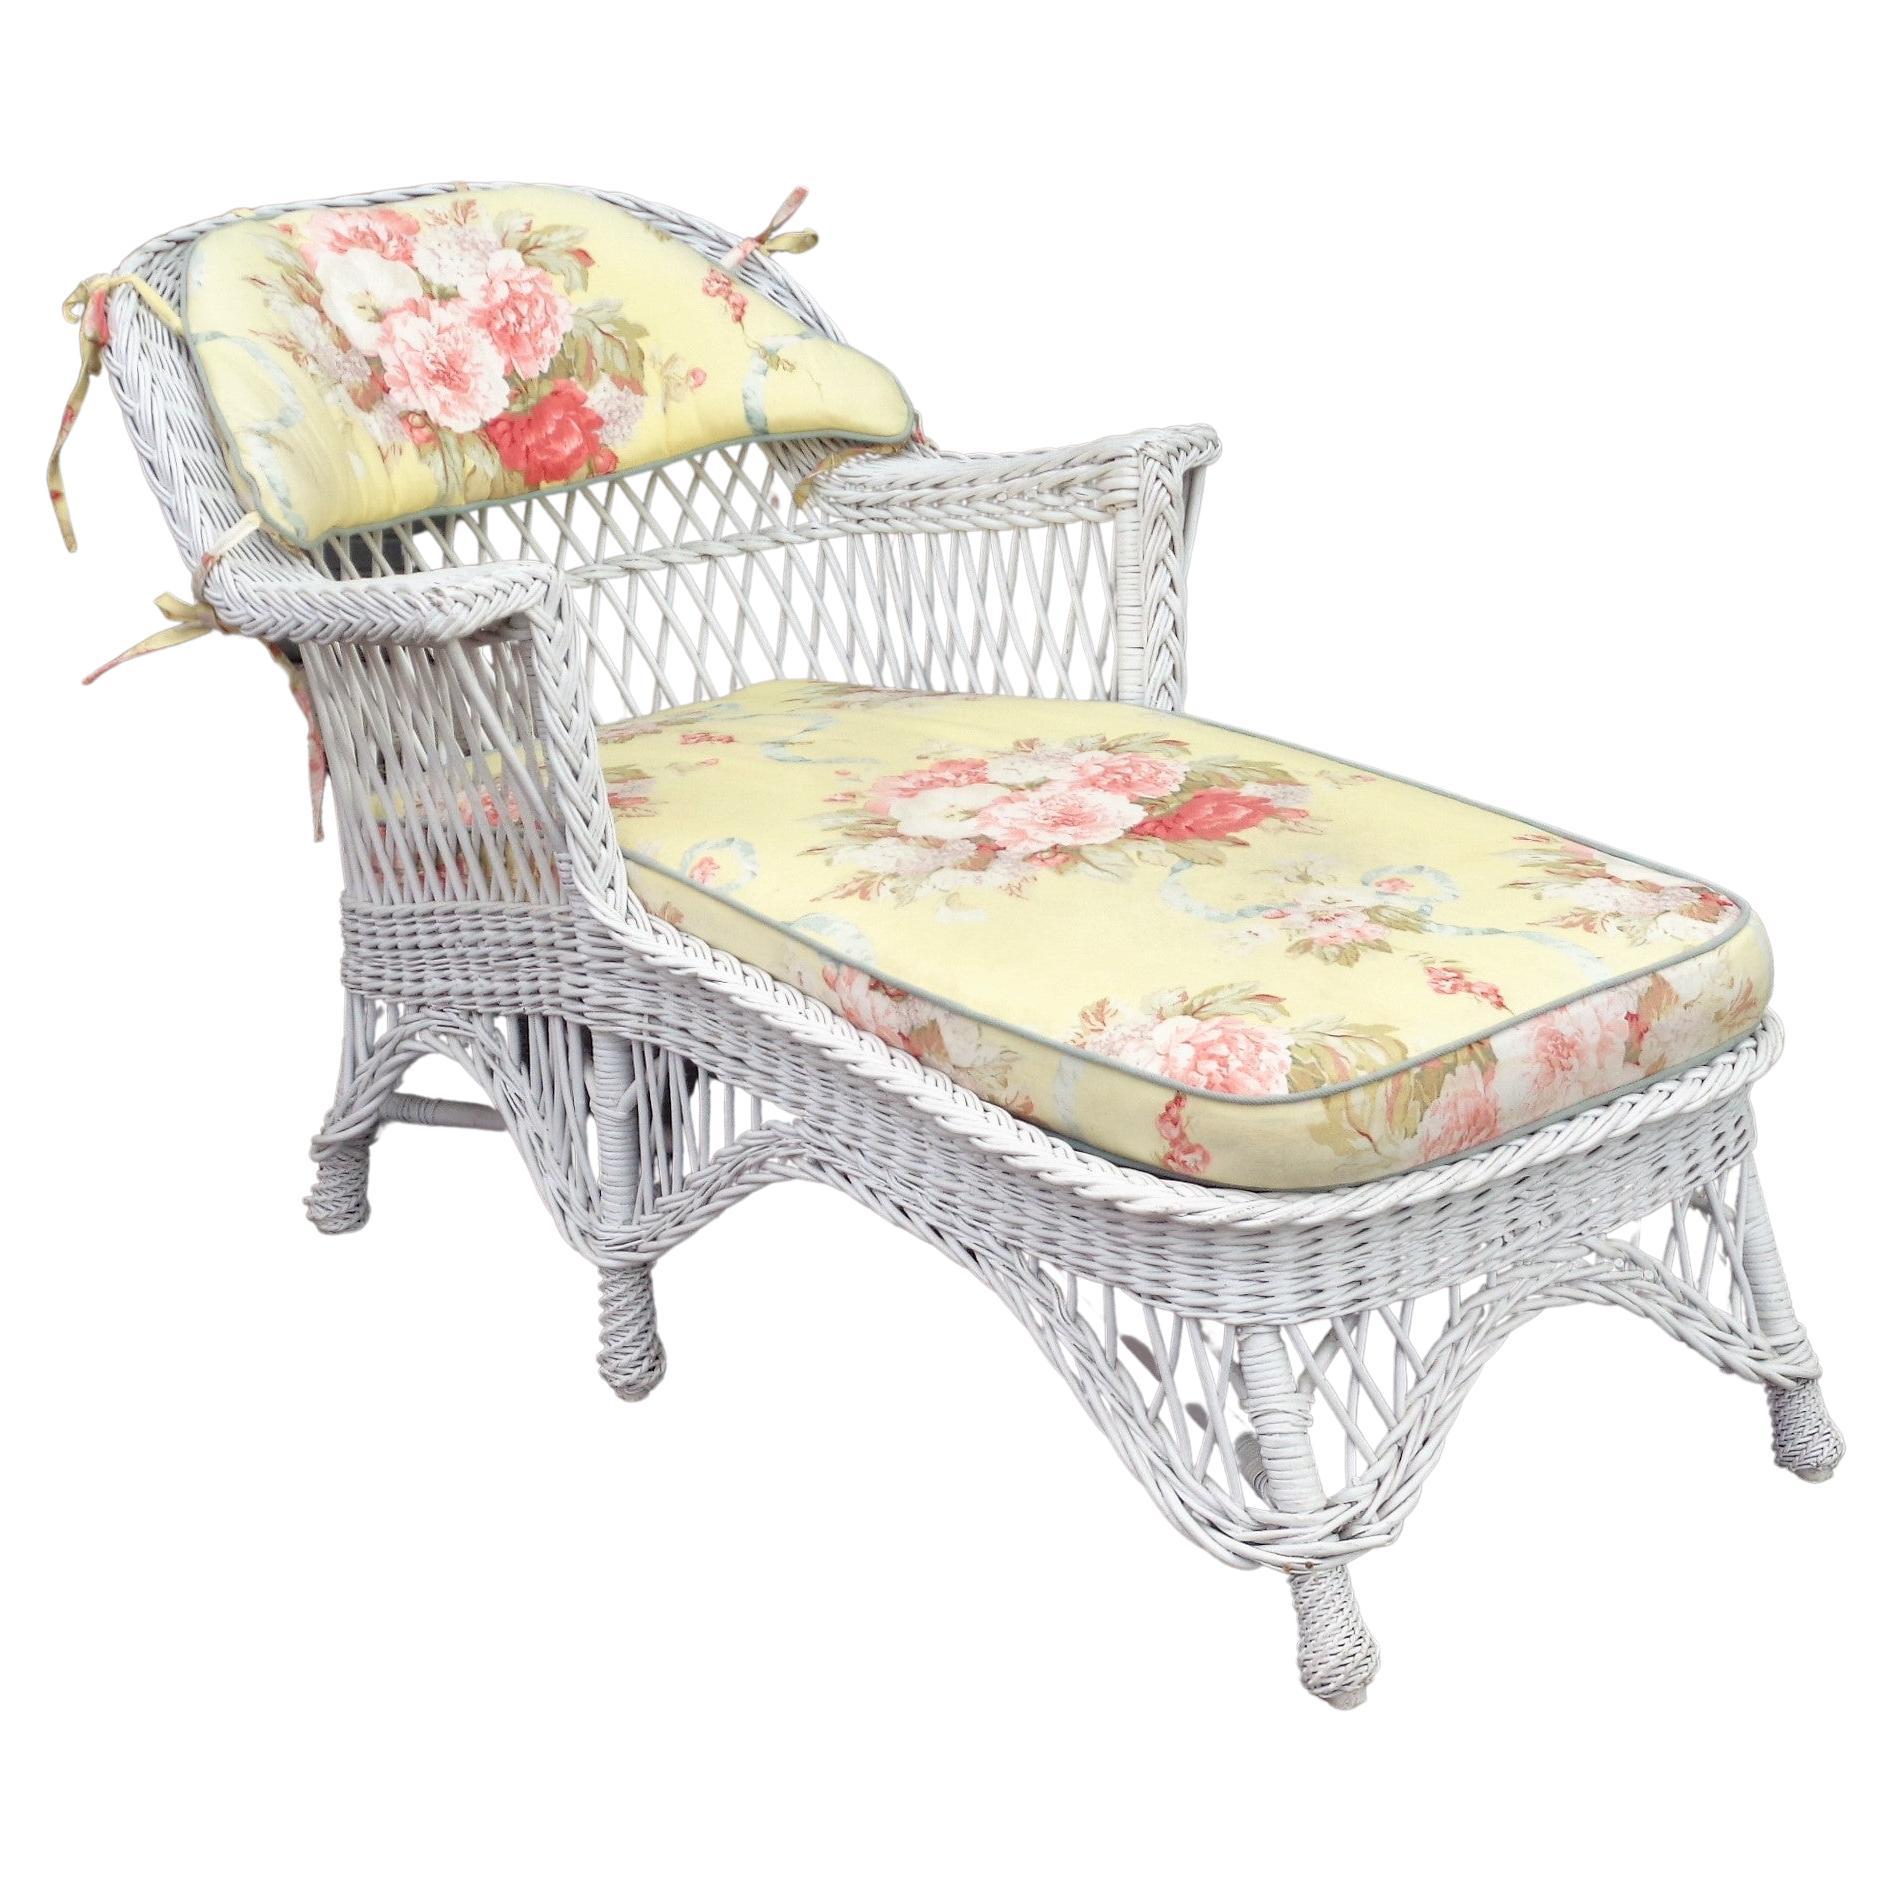 Antique American classic Bar Harbor wicker willow chaise lounge in nice white painted surface. Wood frame work w/ metal strapped spring construction at underside of fabric covered seat. Tightly woven wicker w/ upholstered floral pattern loose seat